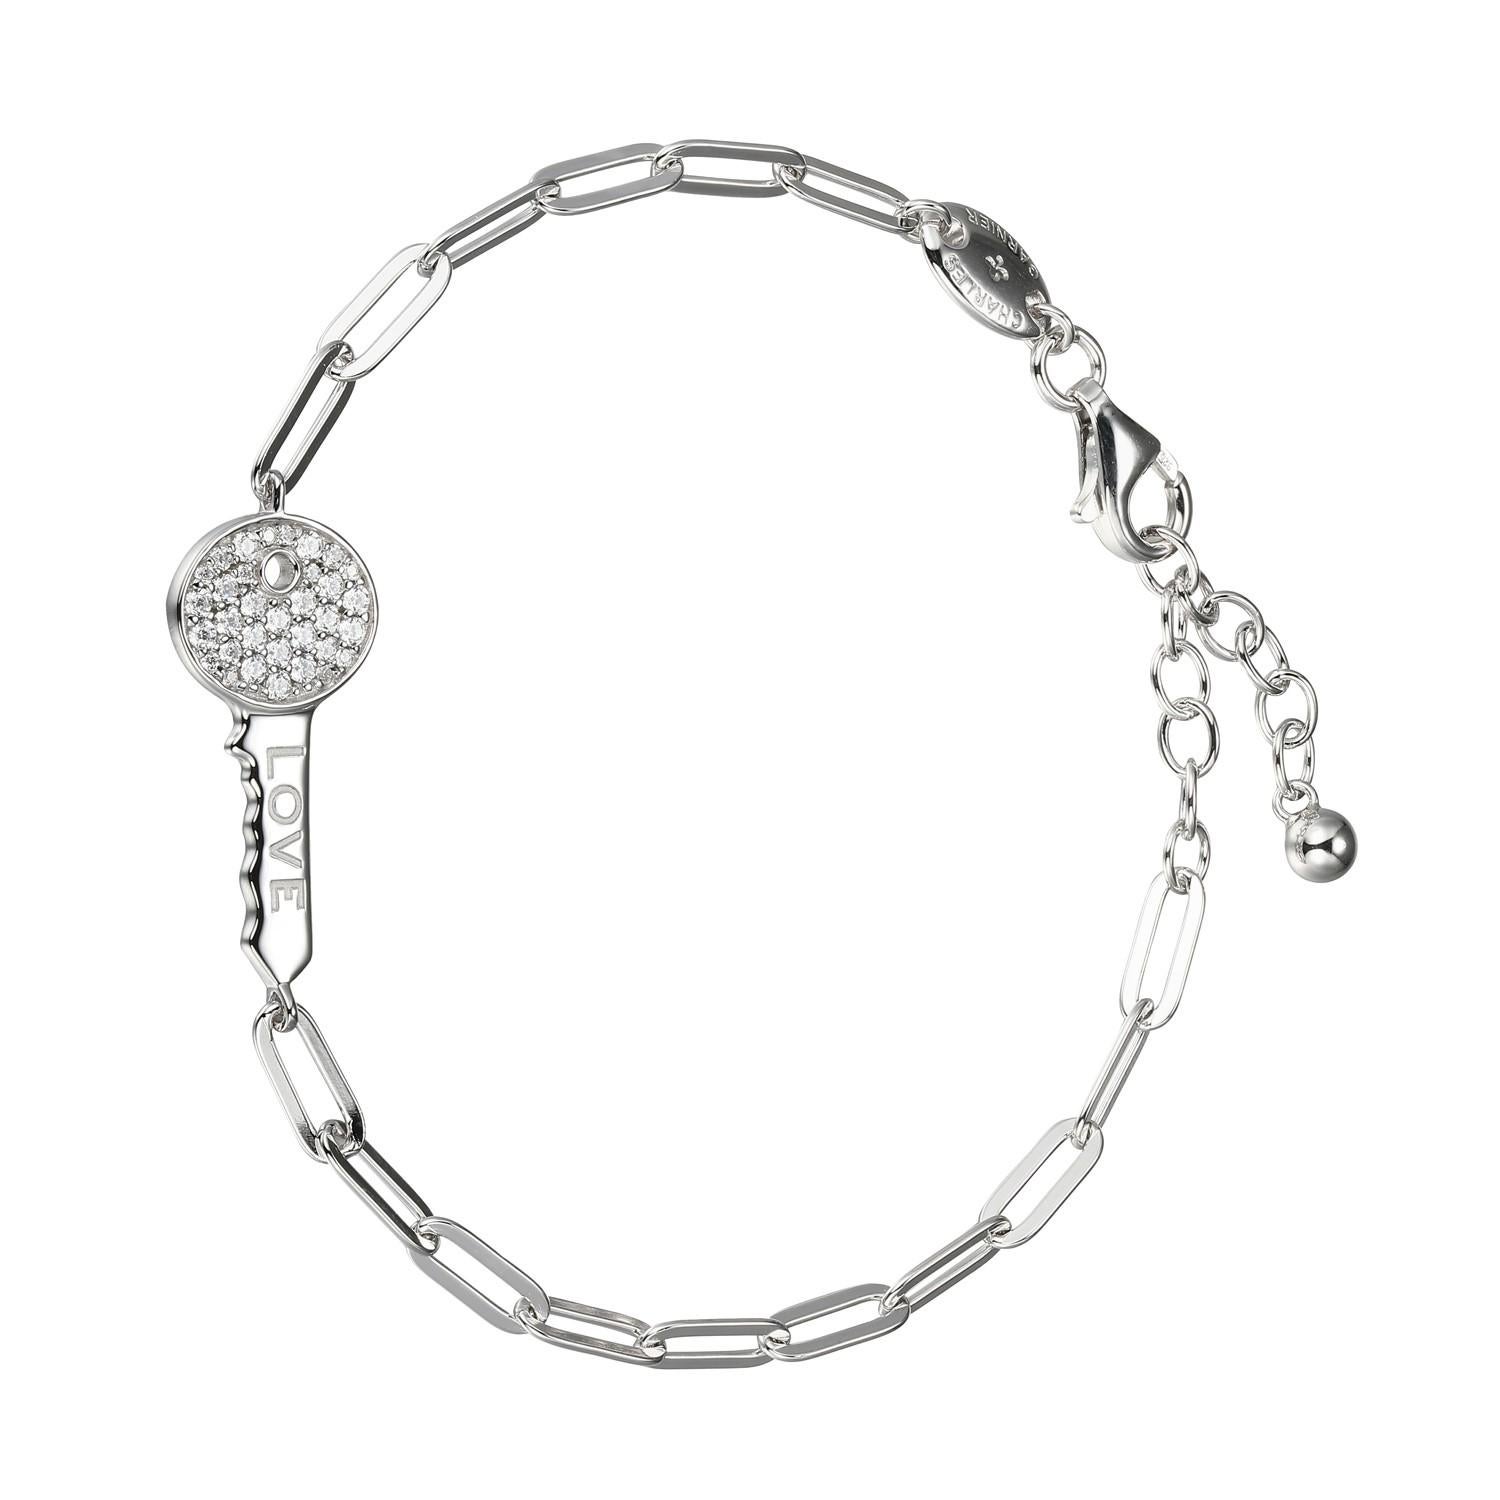 Sterling Silver Bracelet made with Paperclip Chain (3mm) and CZ Love Key (24x12mm) in Center, Measures 6.75